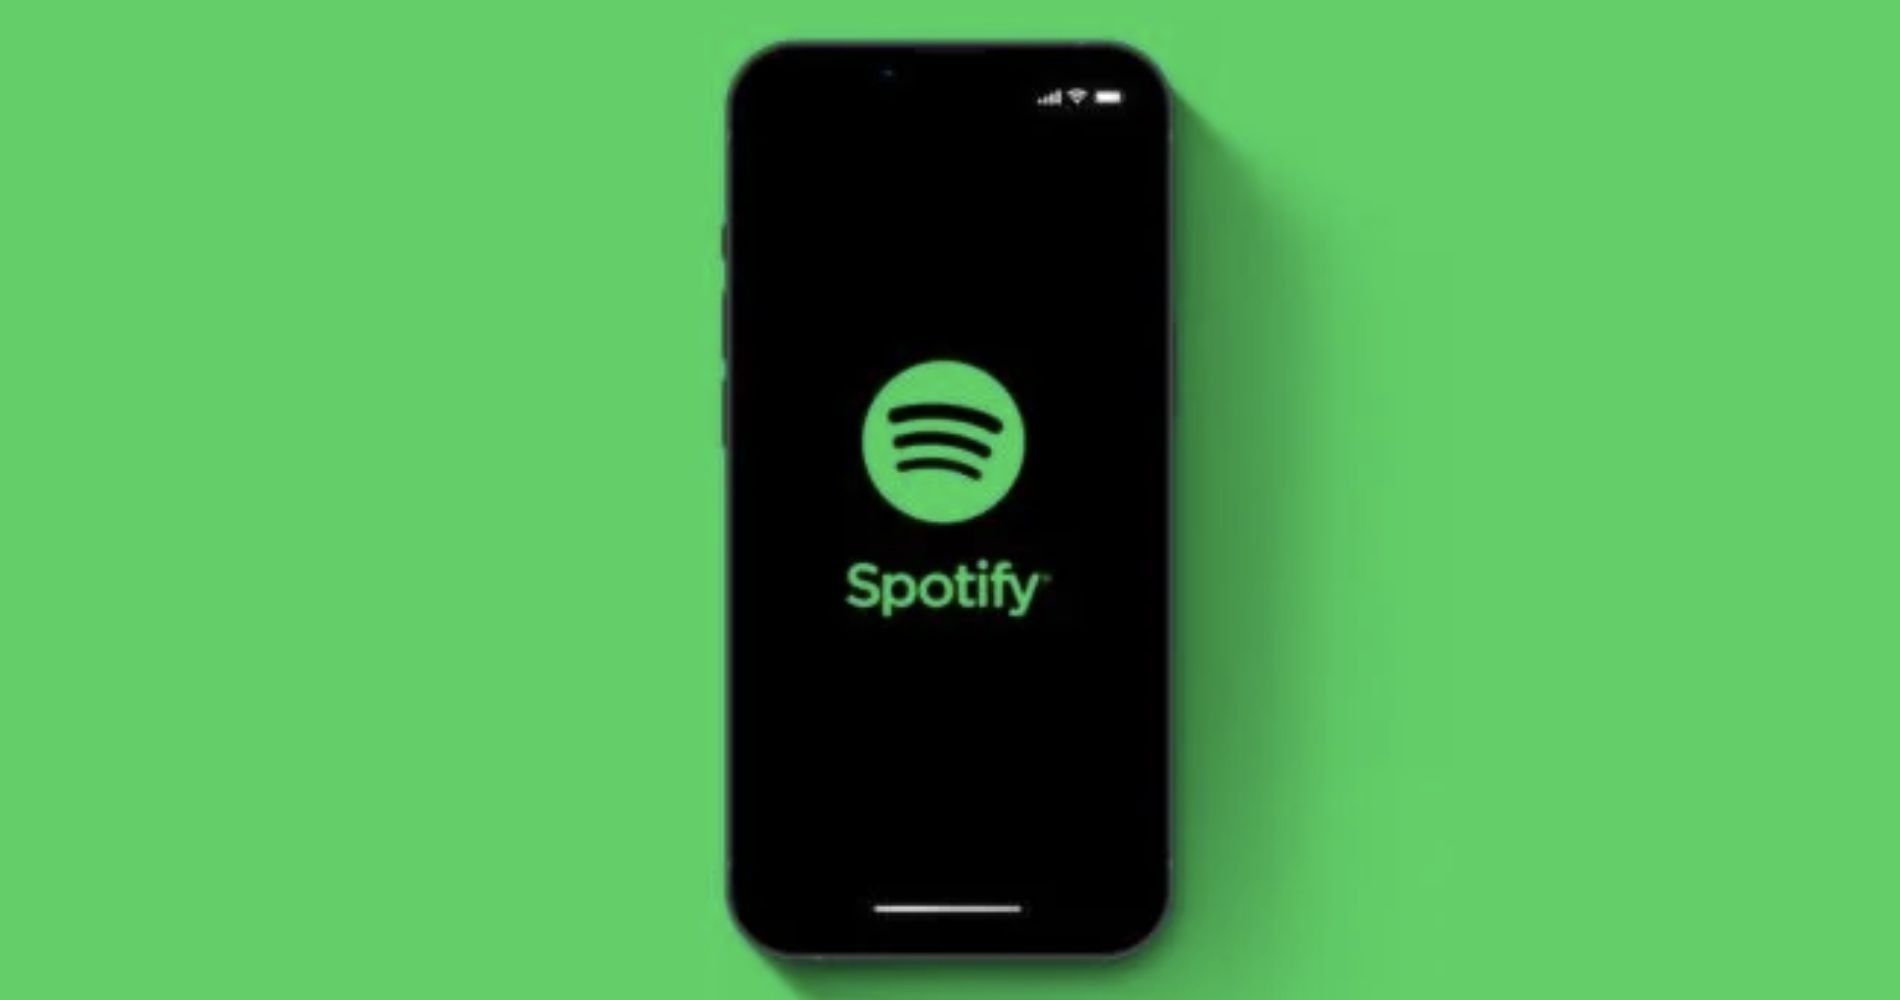 Spotify has closed the acquisition of digital audiobook distribution company